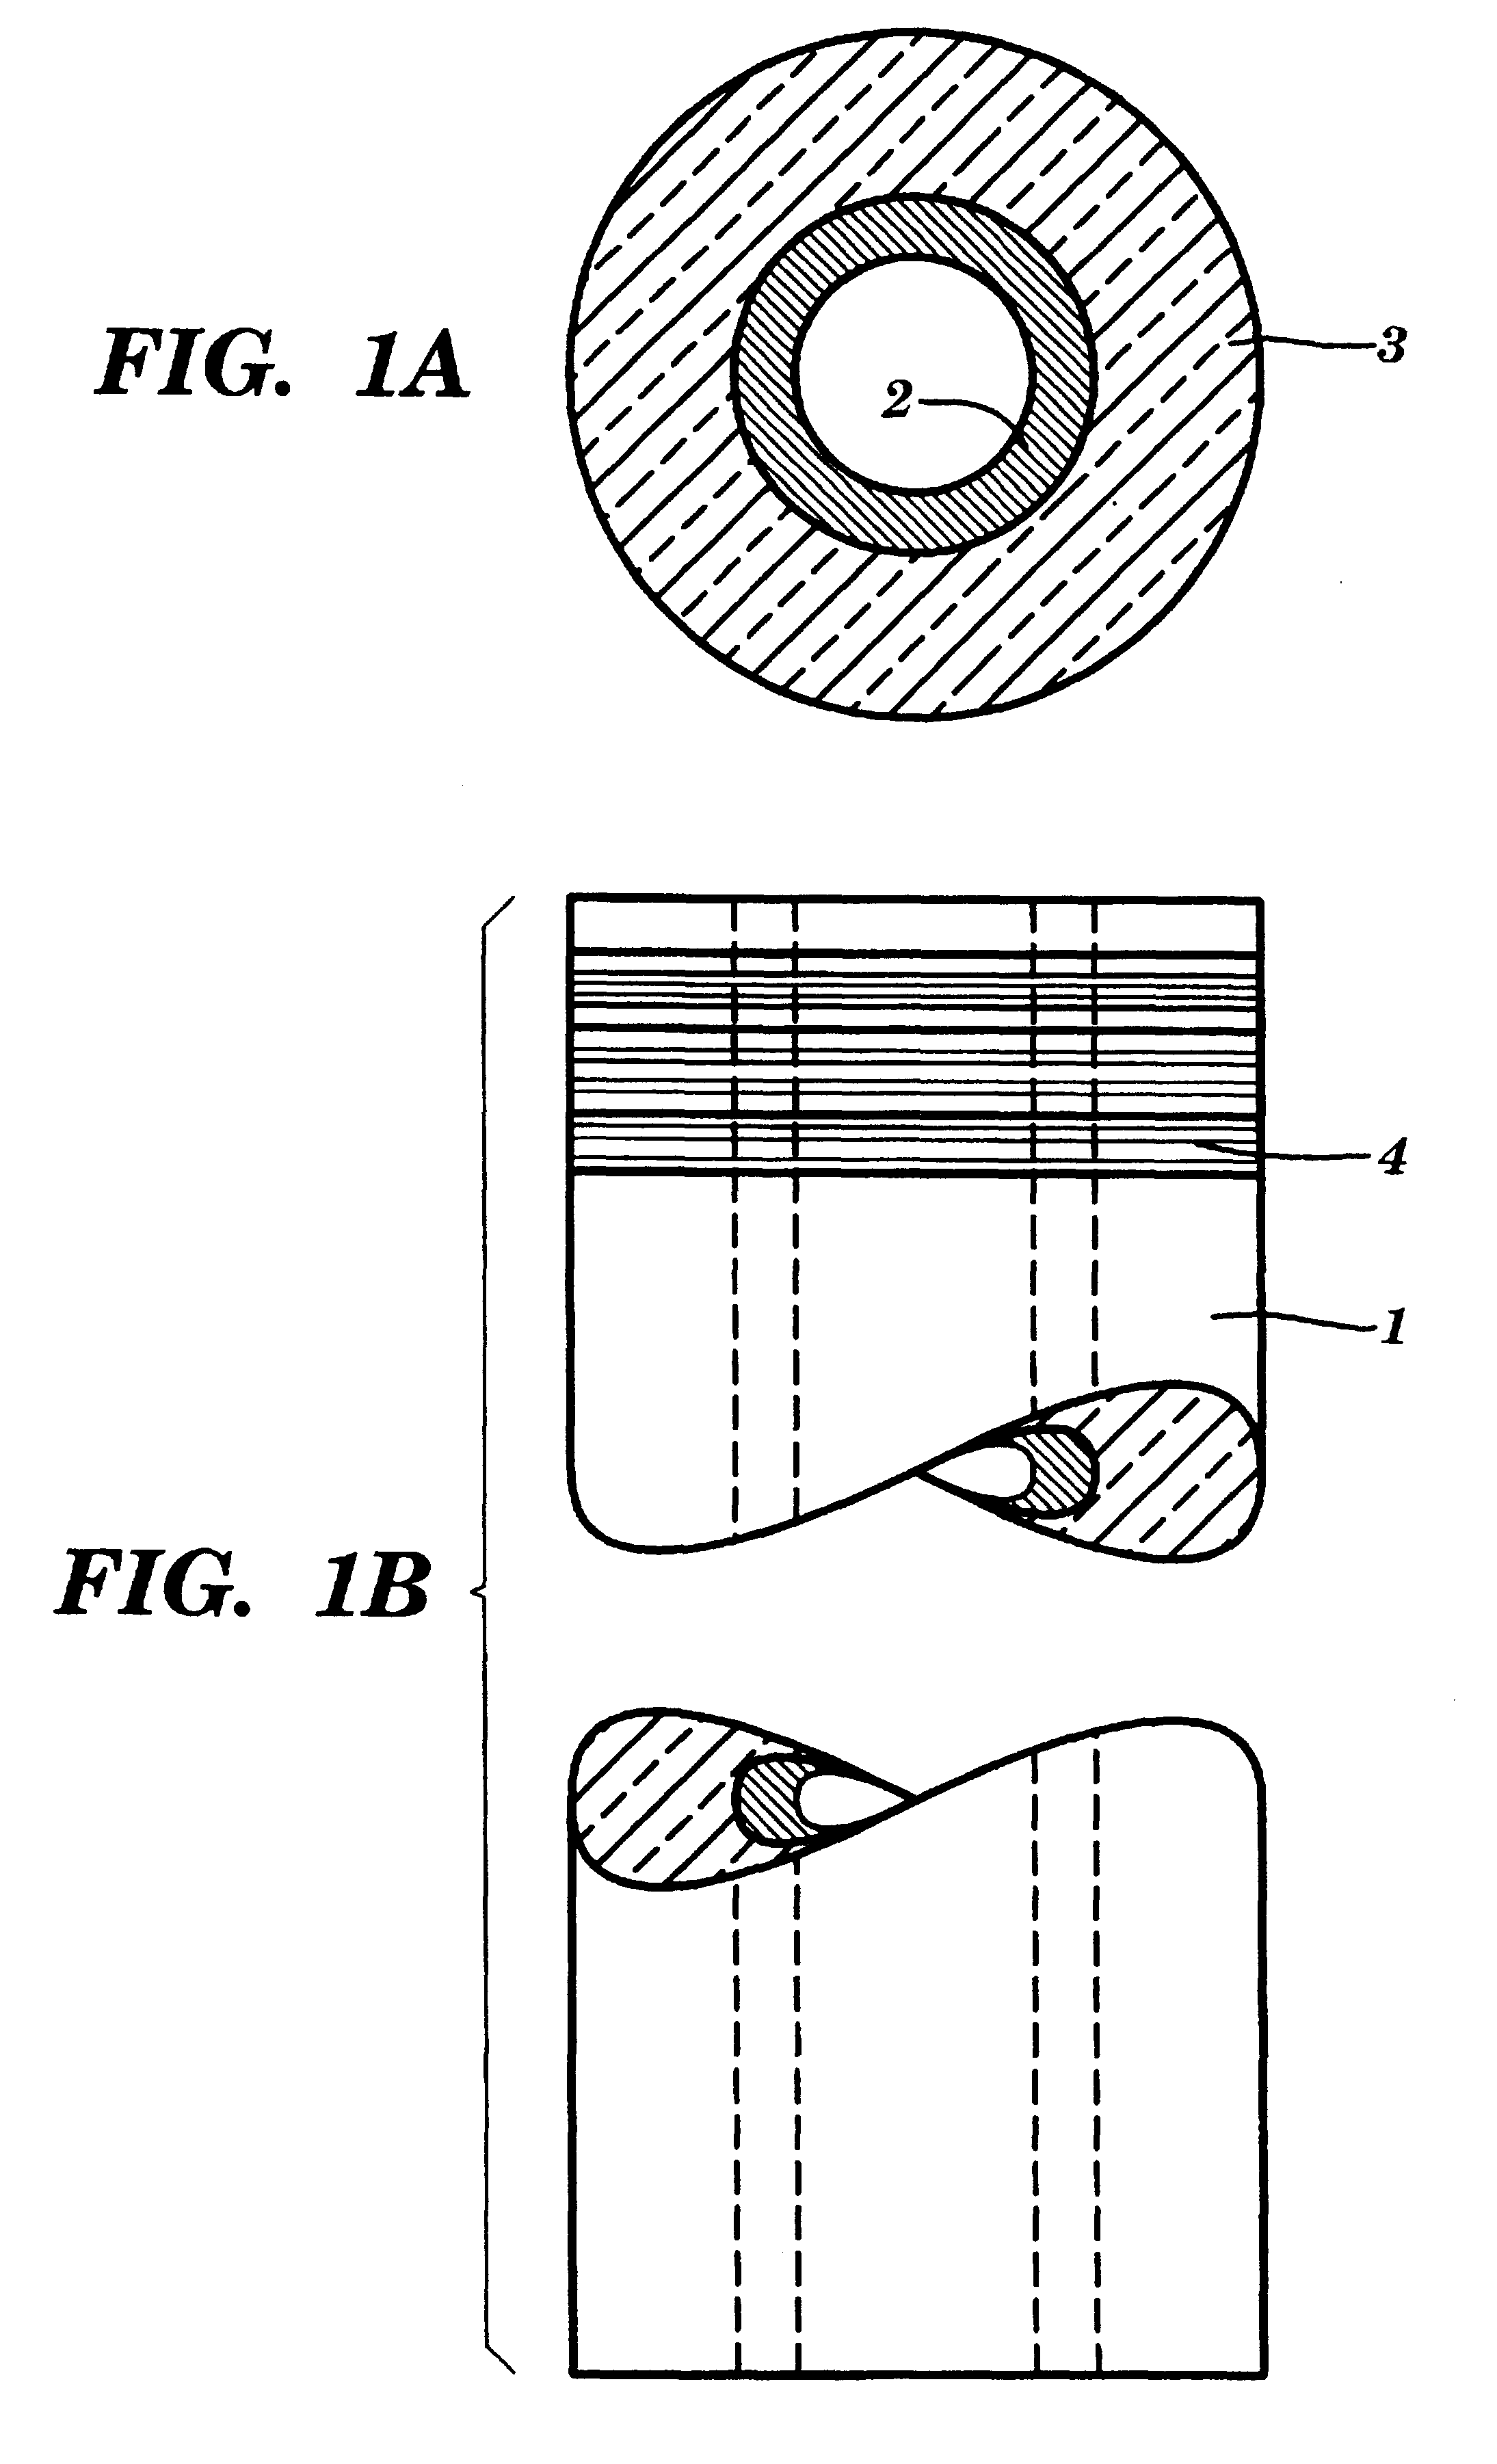 High throughput solid phase chemical synthesis utilizing thin cylindrical reaction vessels useable for biological assay